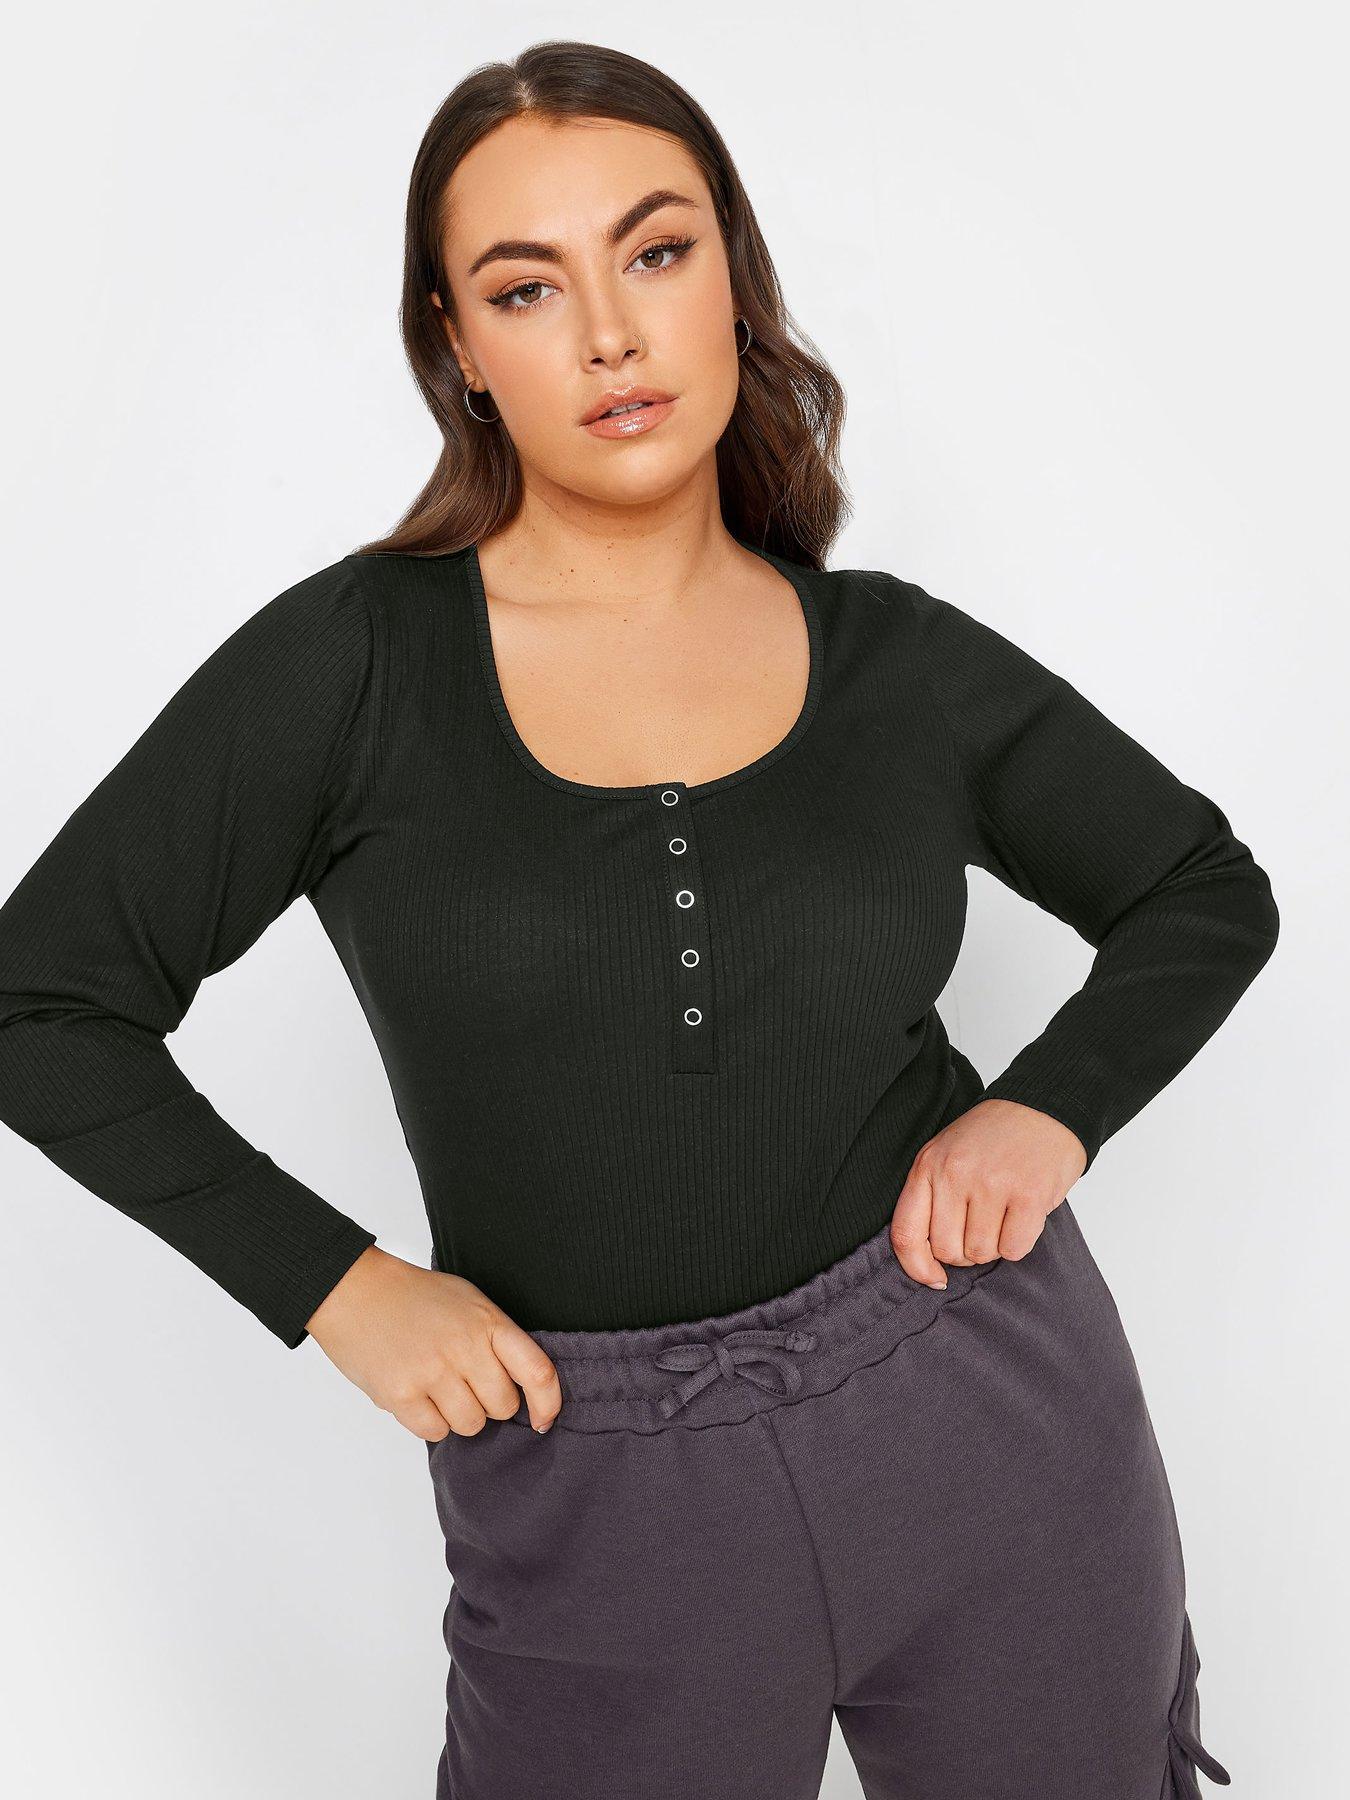 Cotton On / Staple Rib Scoop Neck Long Sleeve Top, Women's Fashion, Tops,  Longsleeves on Carousell